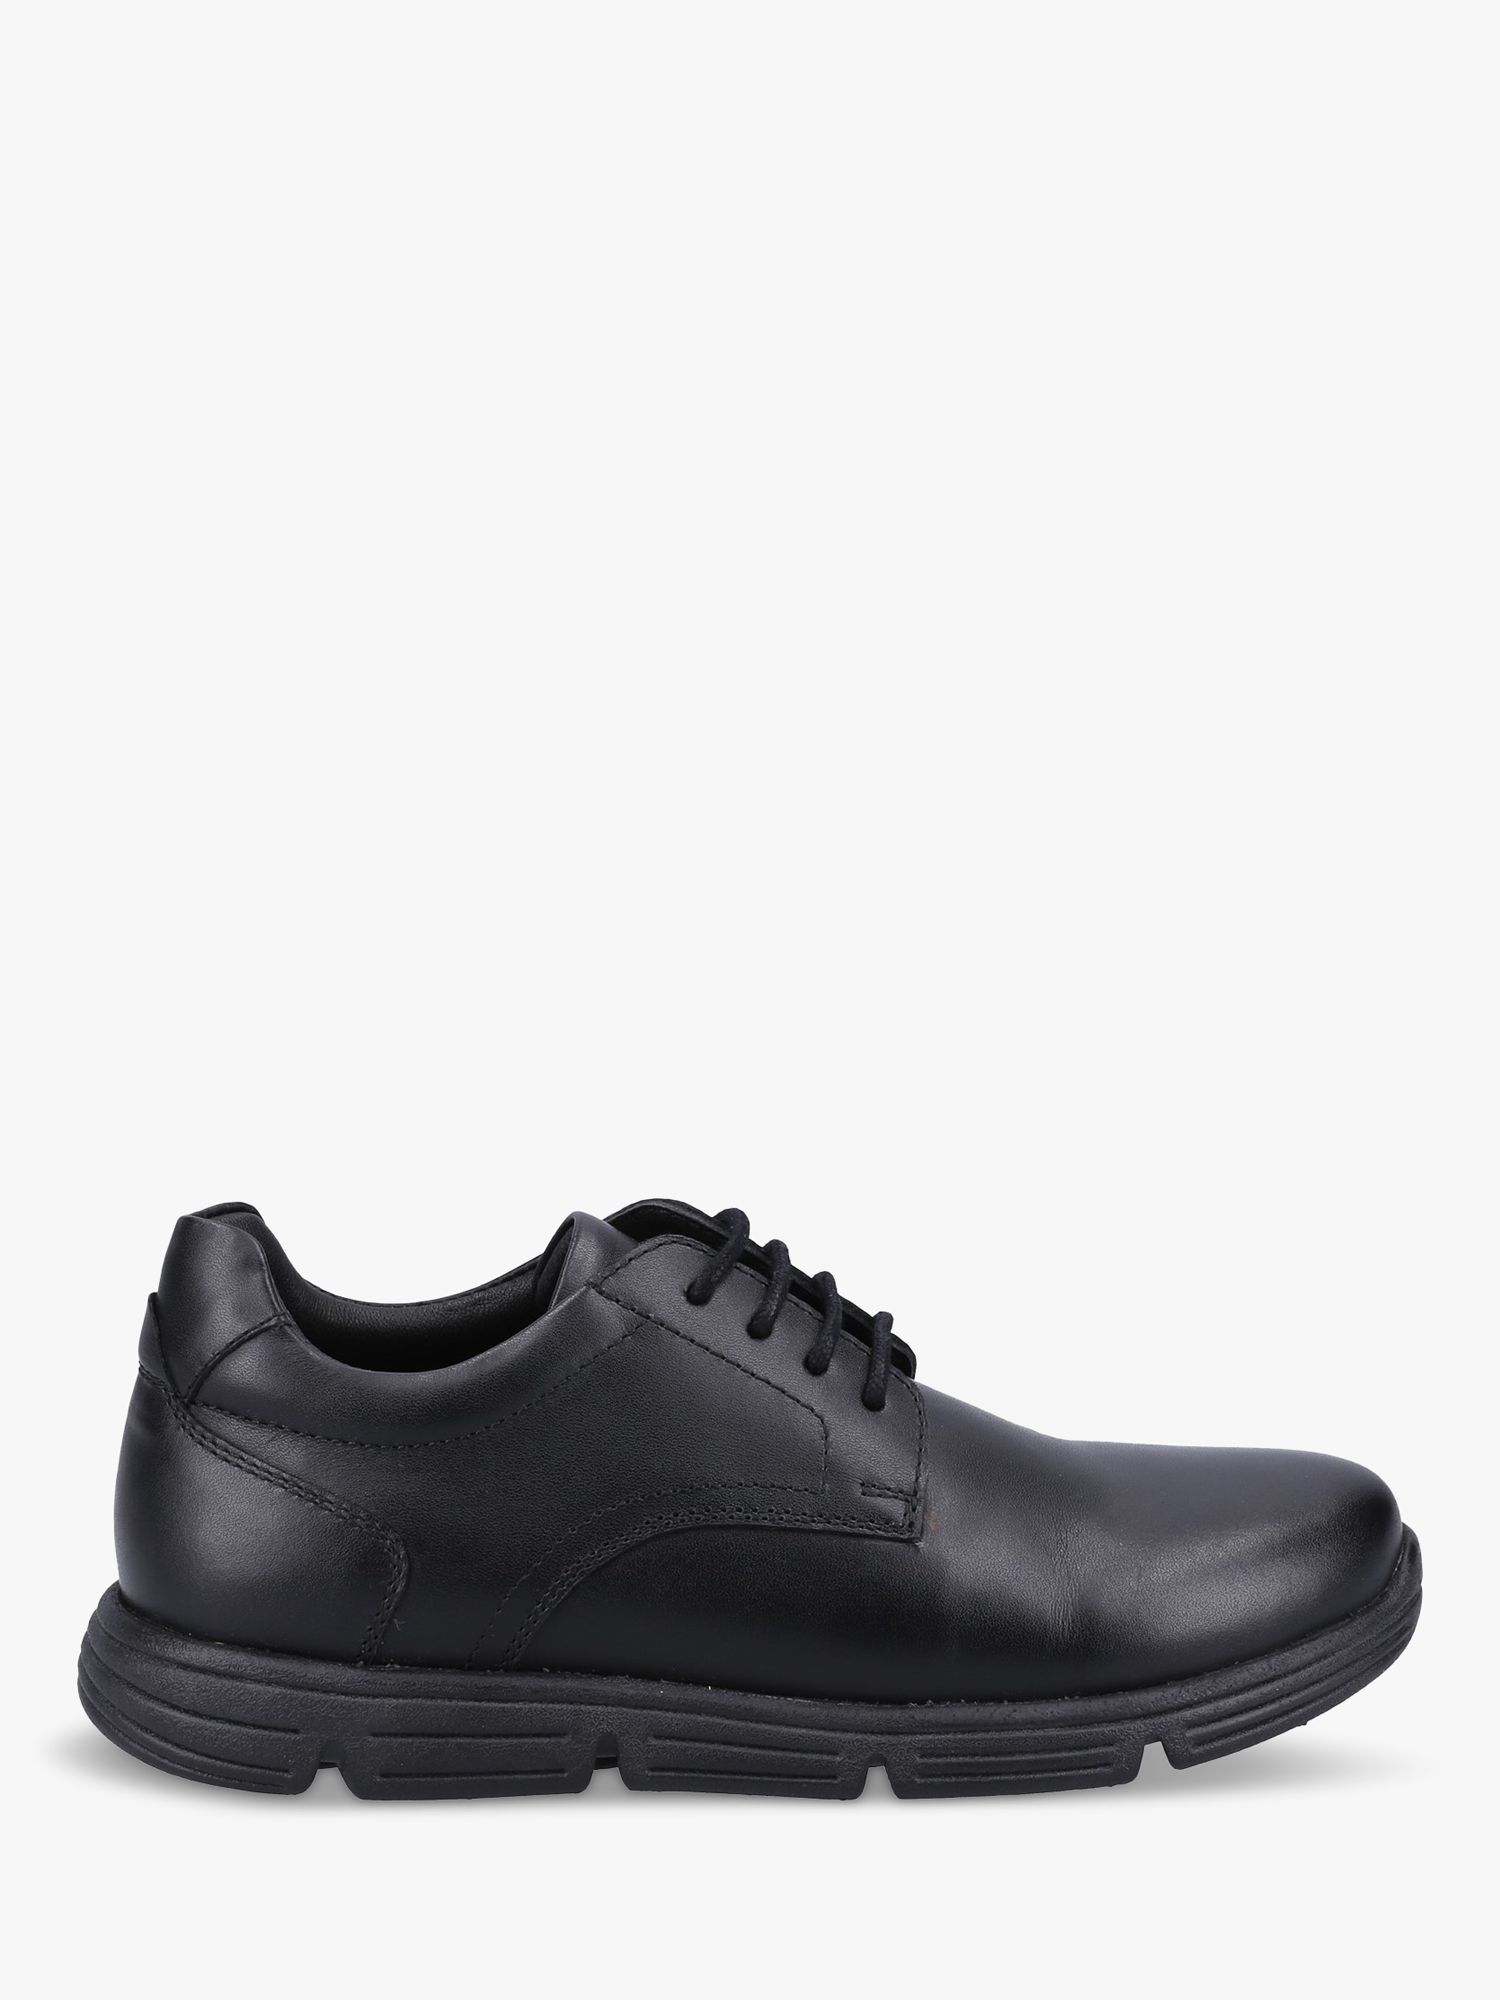 Hush Puppies Kids' Adrian Leather Lace-Up Shoes, Black at John Lewis ...